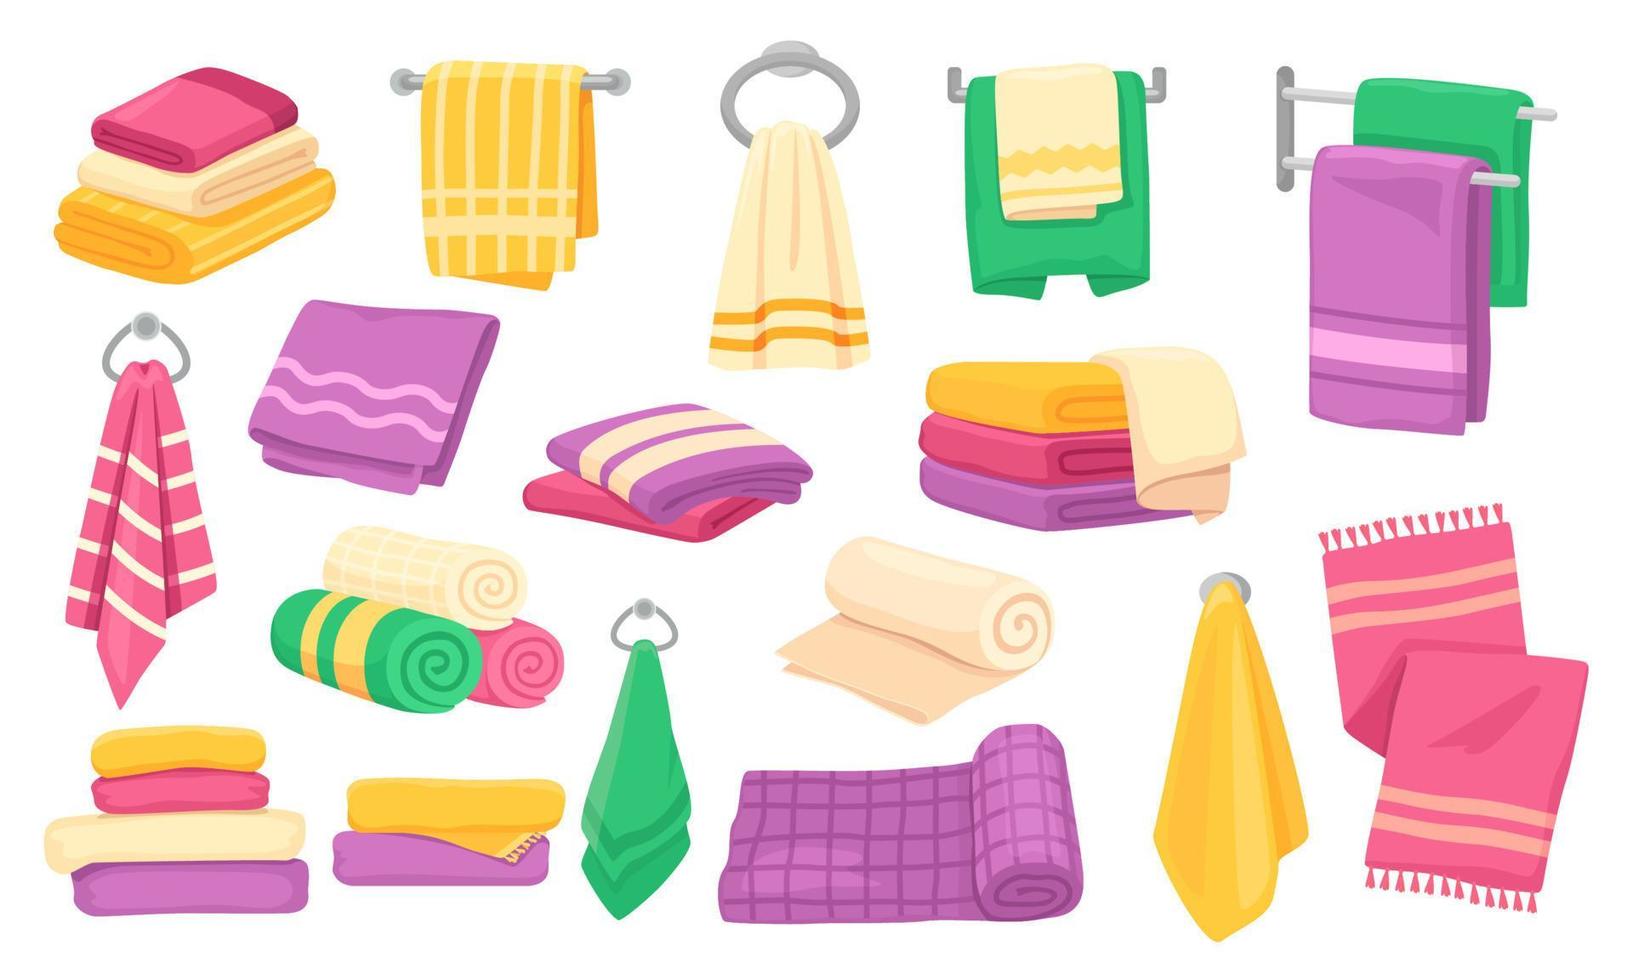 Towel. Cartoon bath rolled towel pile, folded stacked towels, hanging kitchen microfiber clothes. Bathroom cotton fabric towel vector set